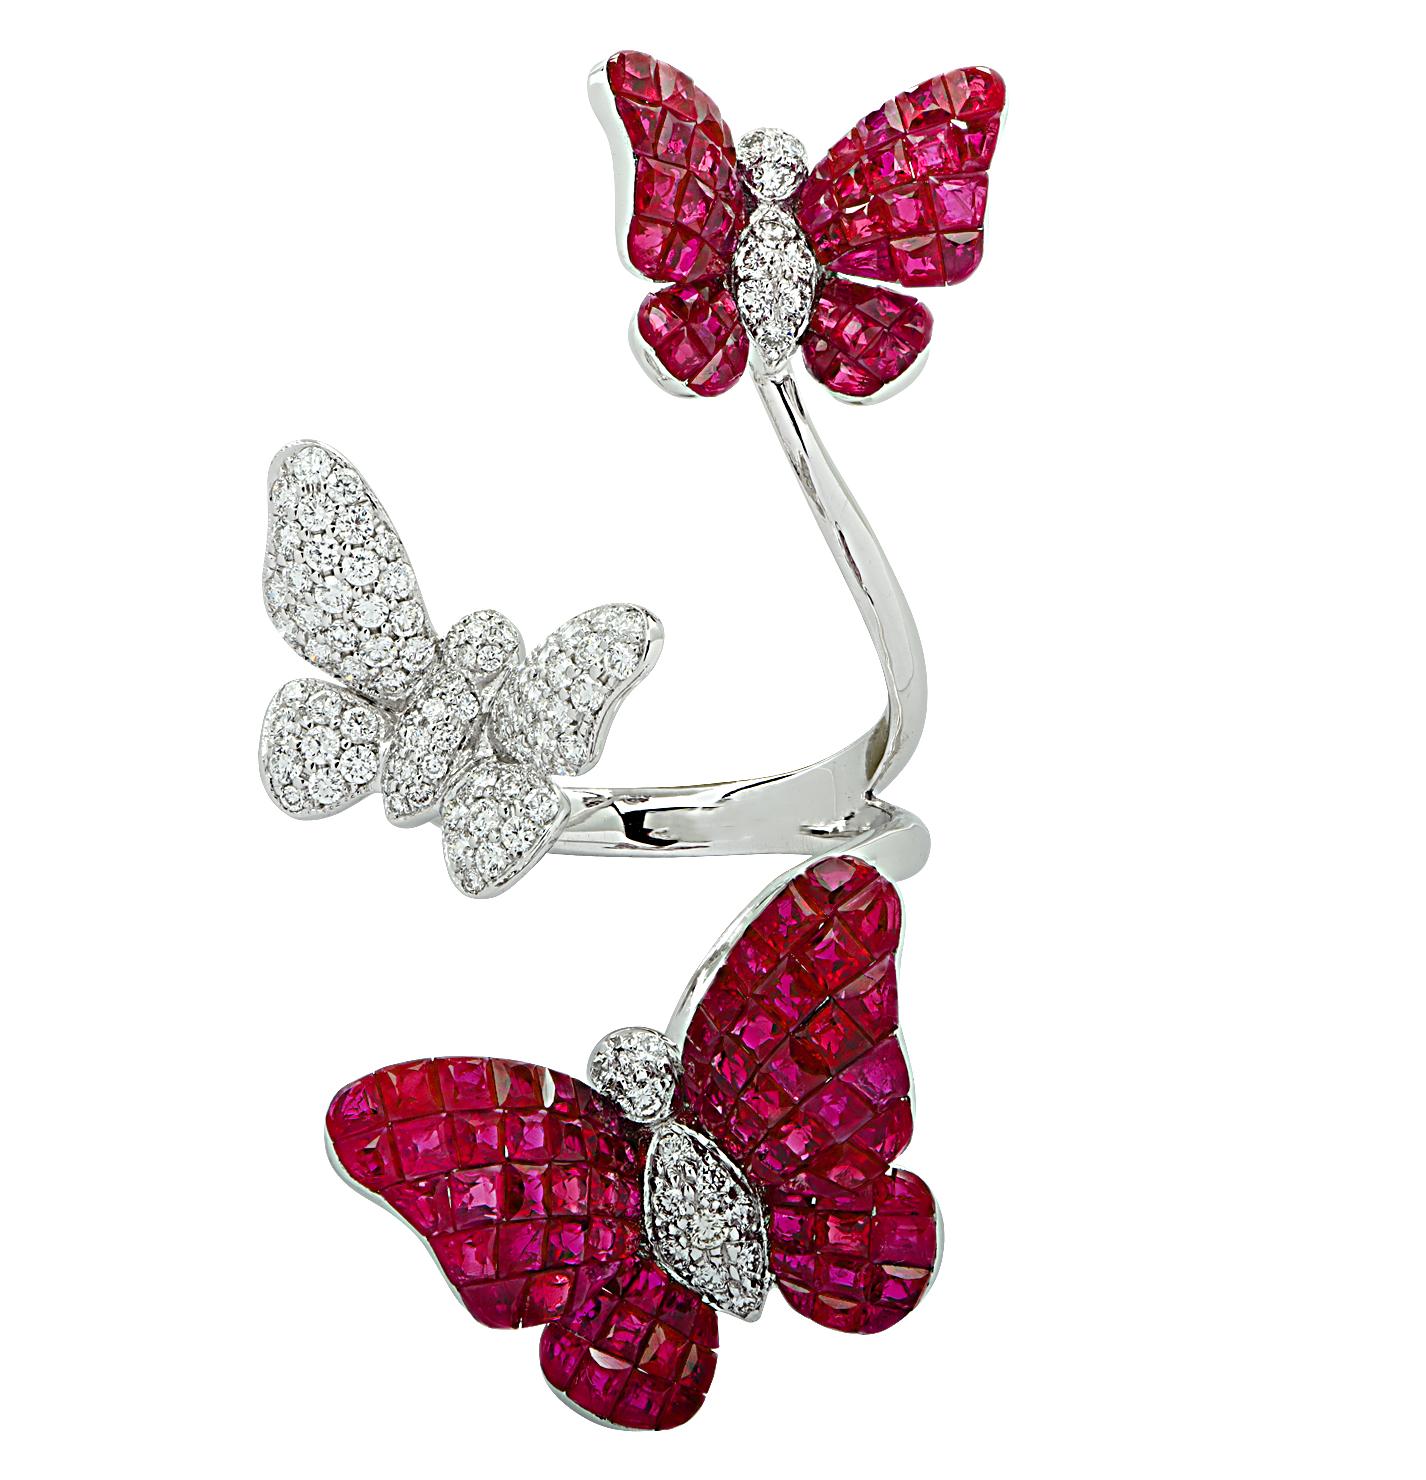 Enchanting ring crafted in 18 karat white gold featuring square cut rubies weighing approximately 12.85 carats total and round brilliant cut diamonds weighing approximately .87 carats total. Two butterflies adorned with invisibly set deep blue